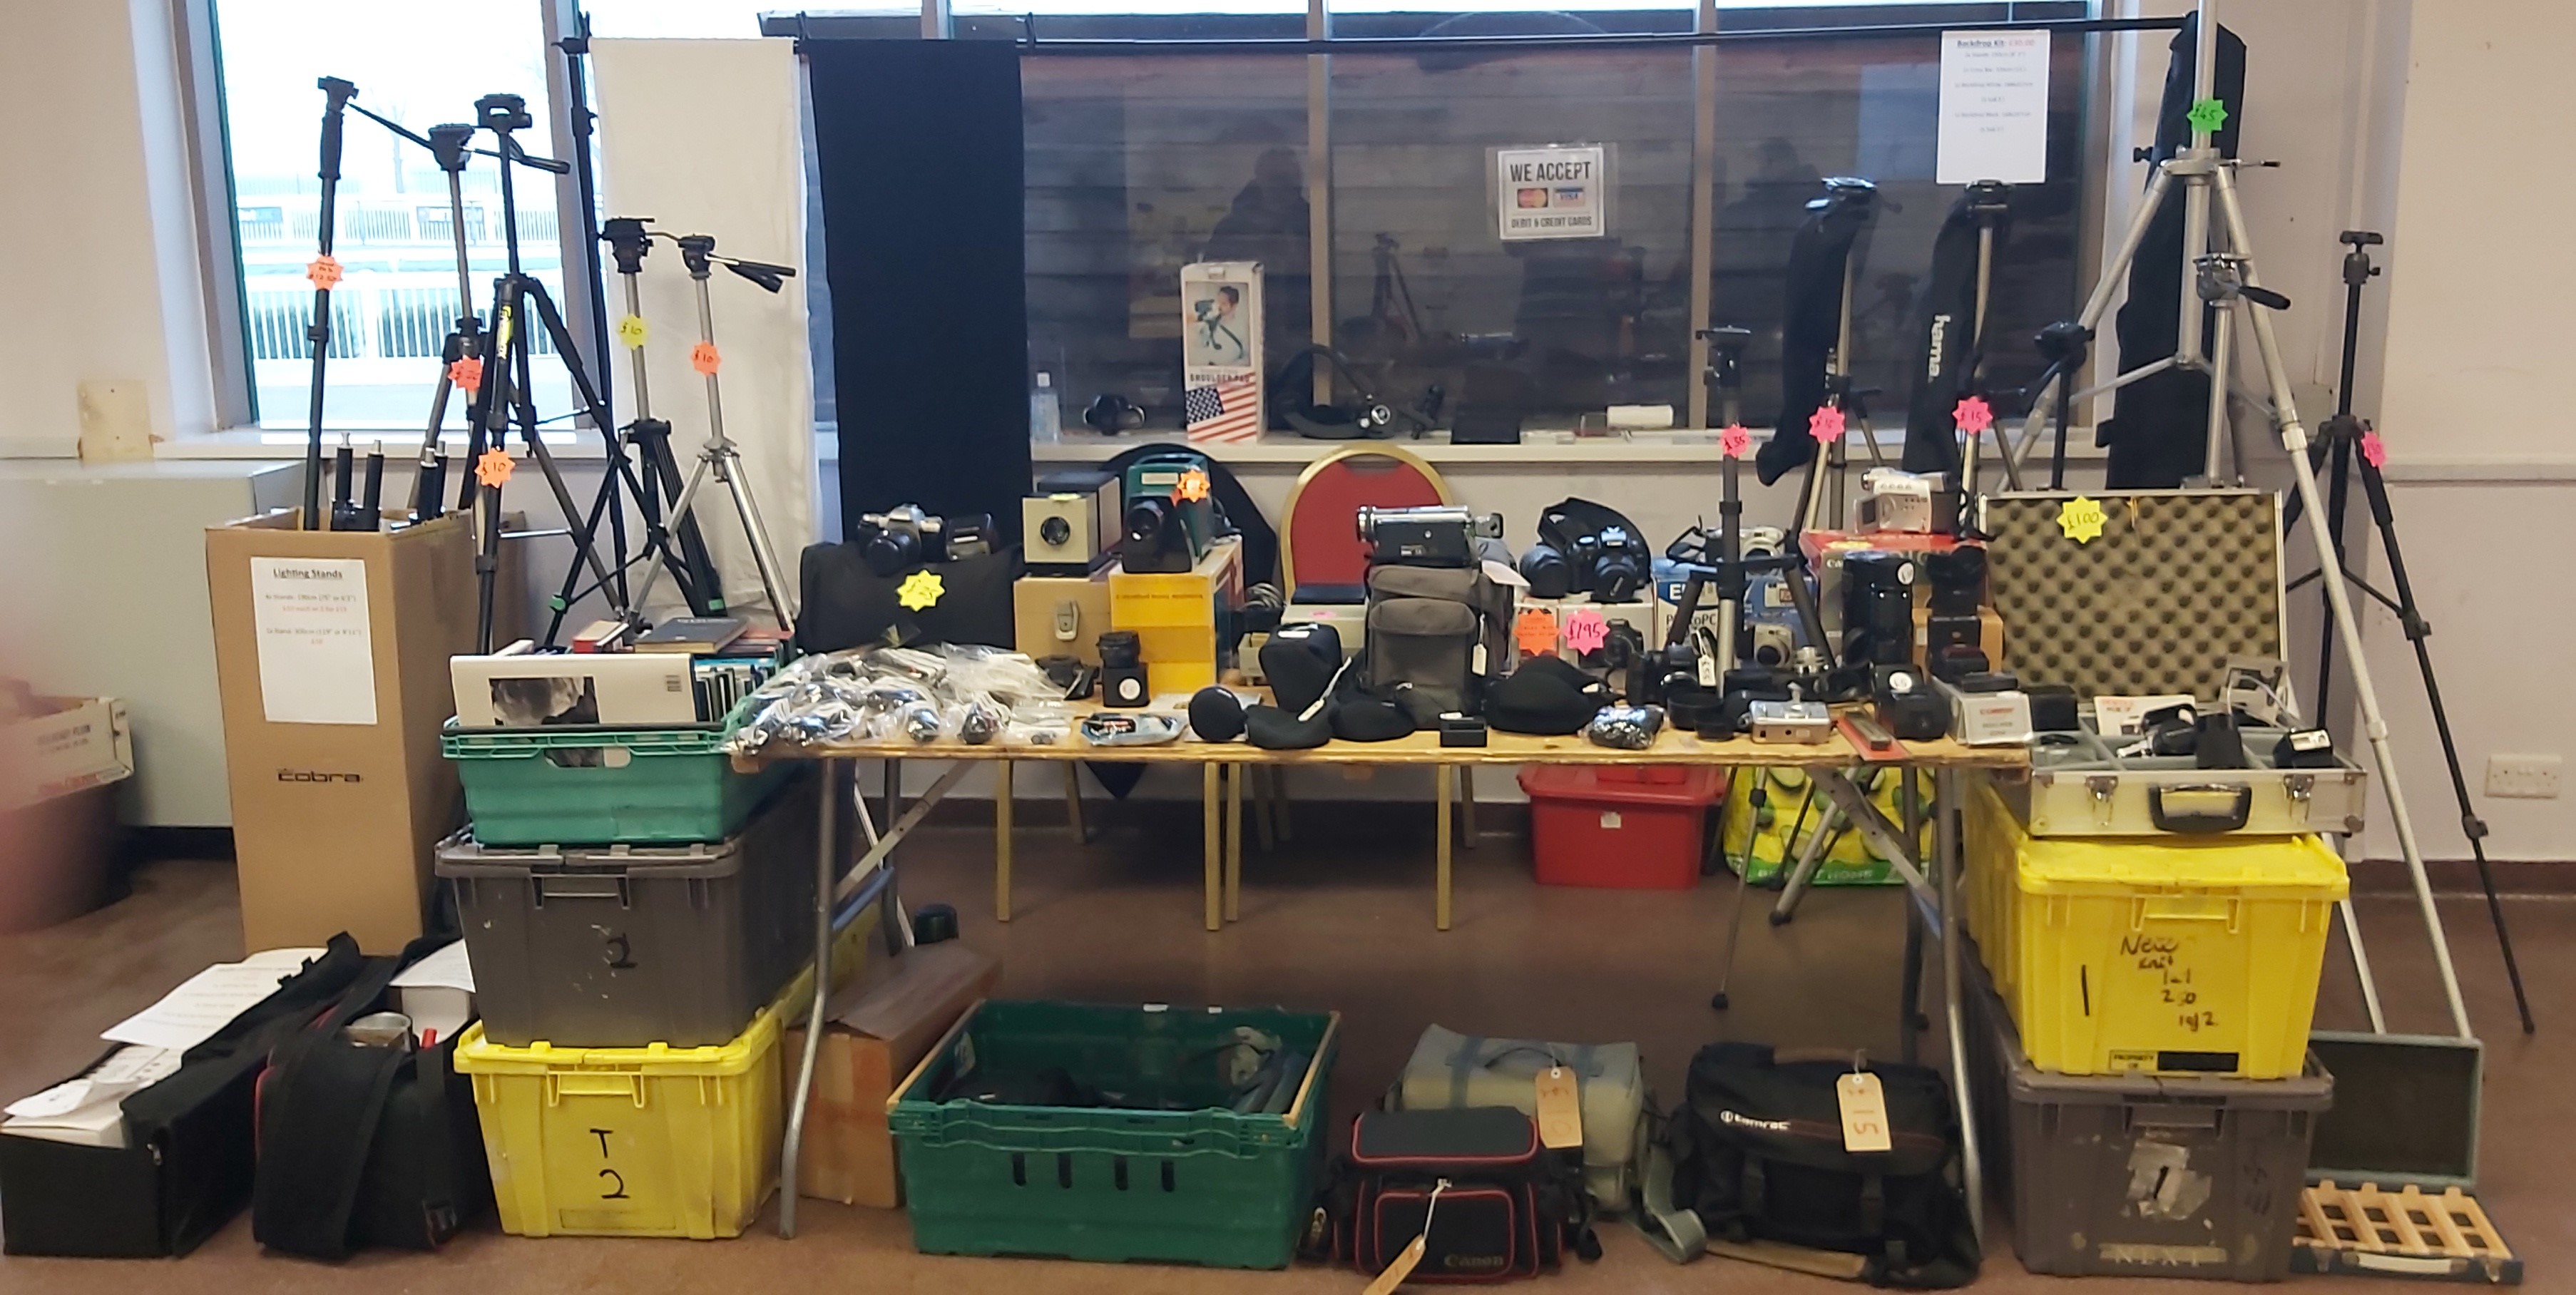 A photograph of the AstroPhotAvia stall at the Wolverhampton Camera Fair 